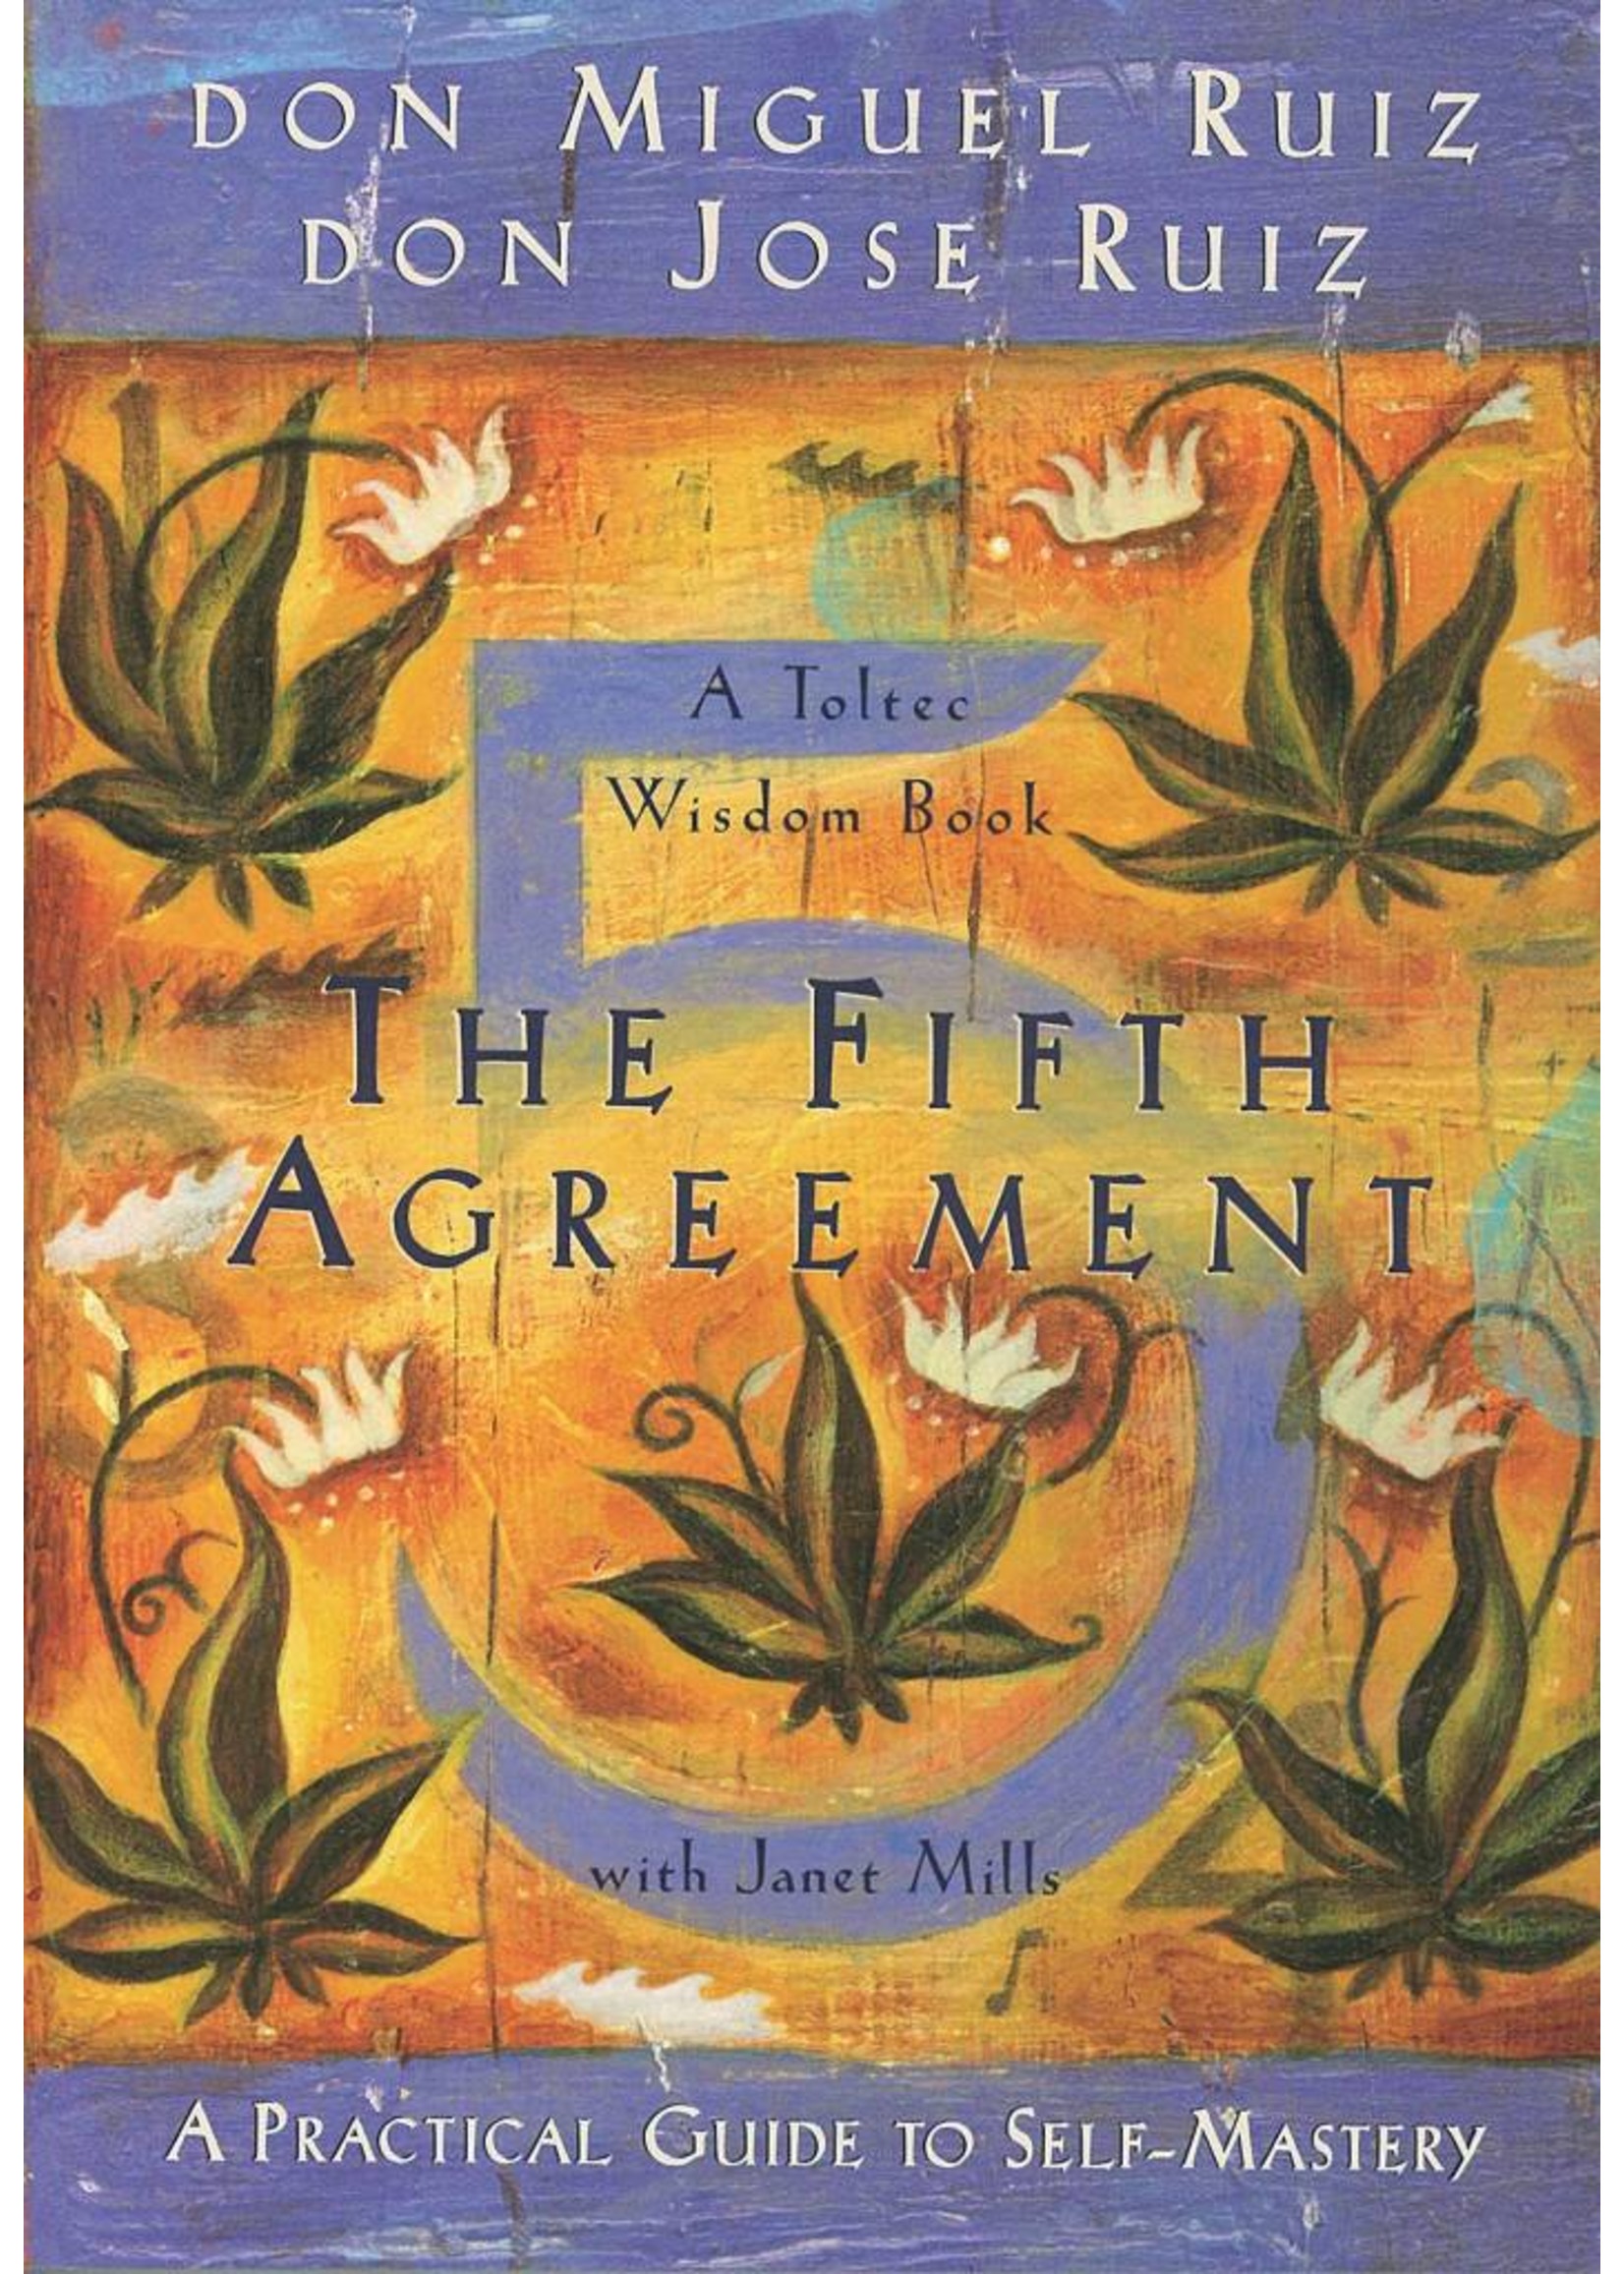 The Fifth Agreement | A Practical Guide to Self-Mastery